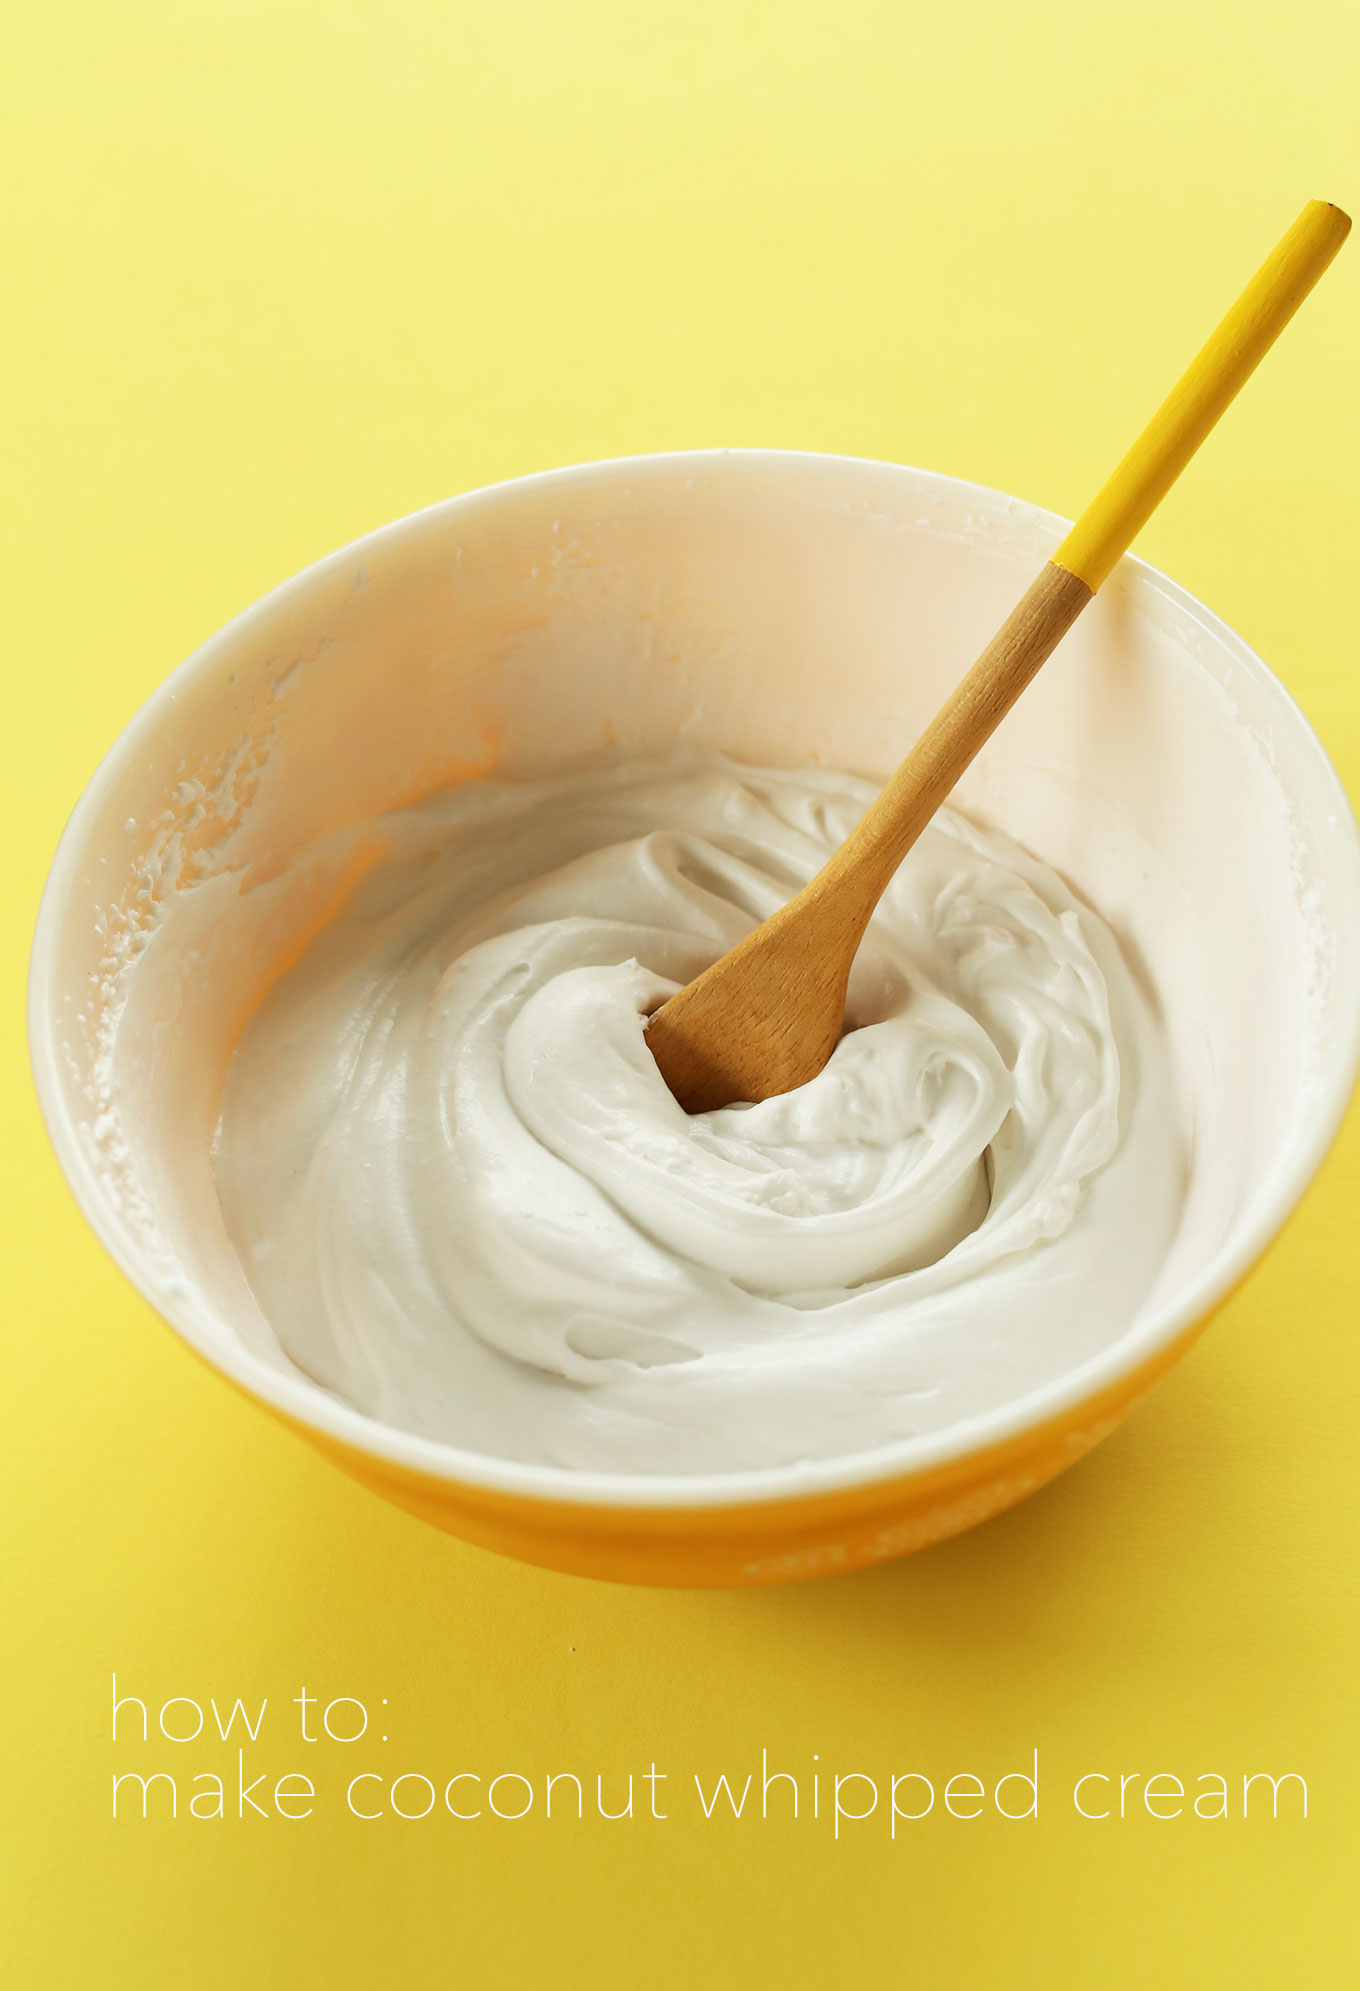 Wooden spoon in a bowl of homemade Coconut Whipped Cream made with our favorite brand of coconut cream